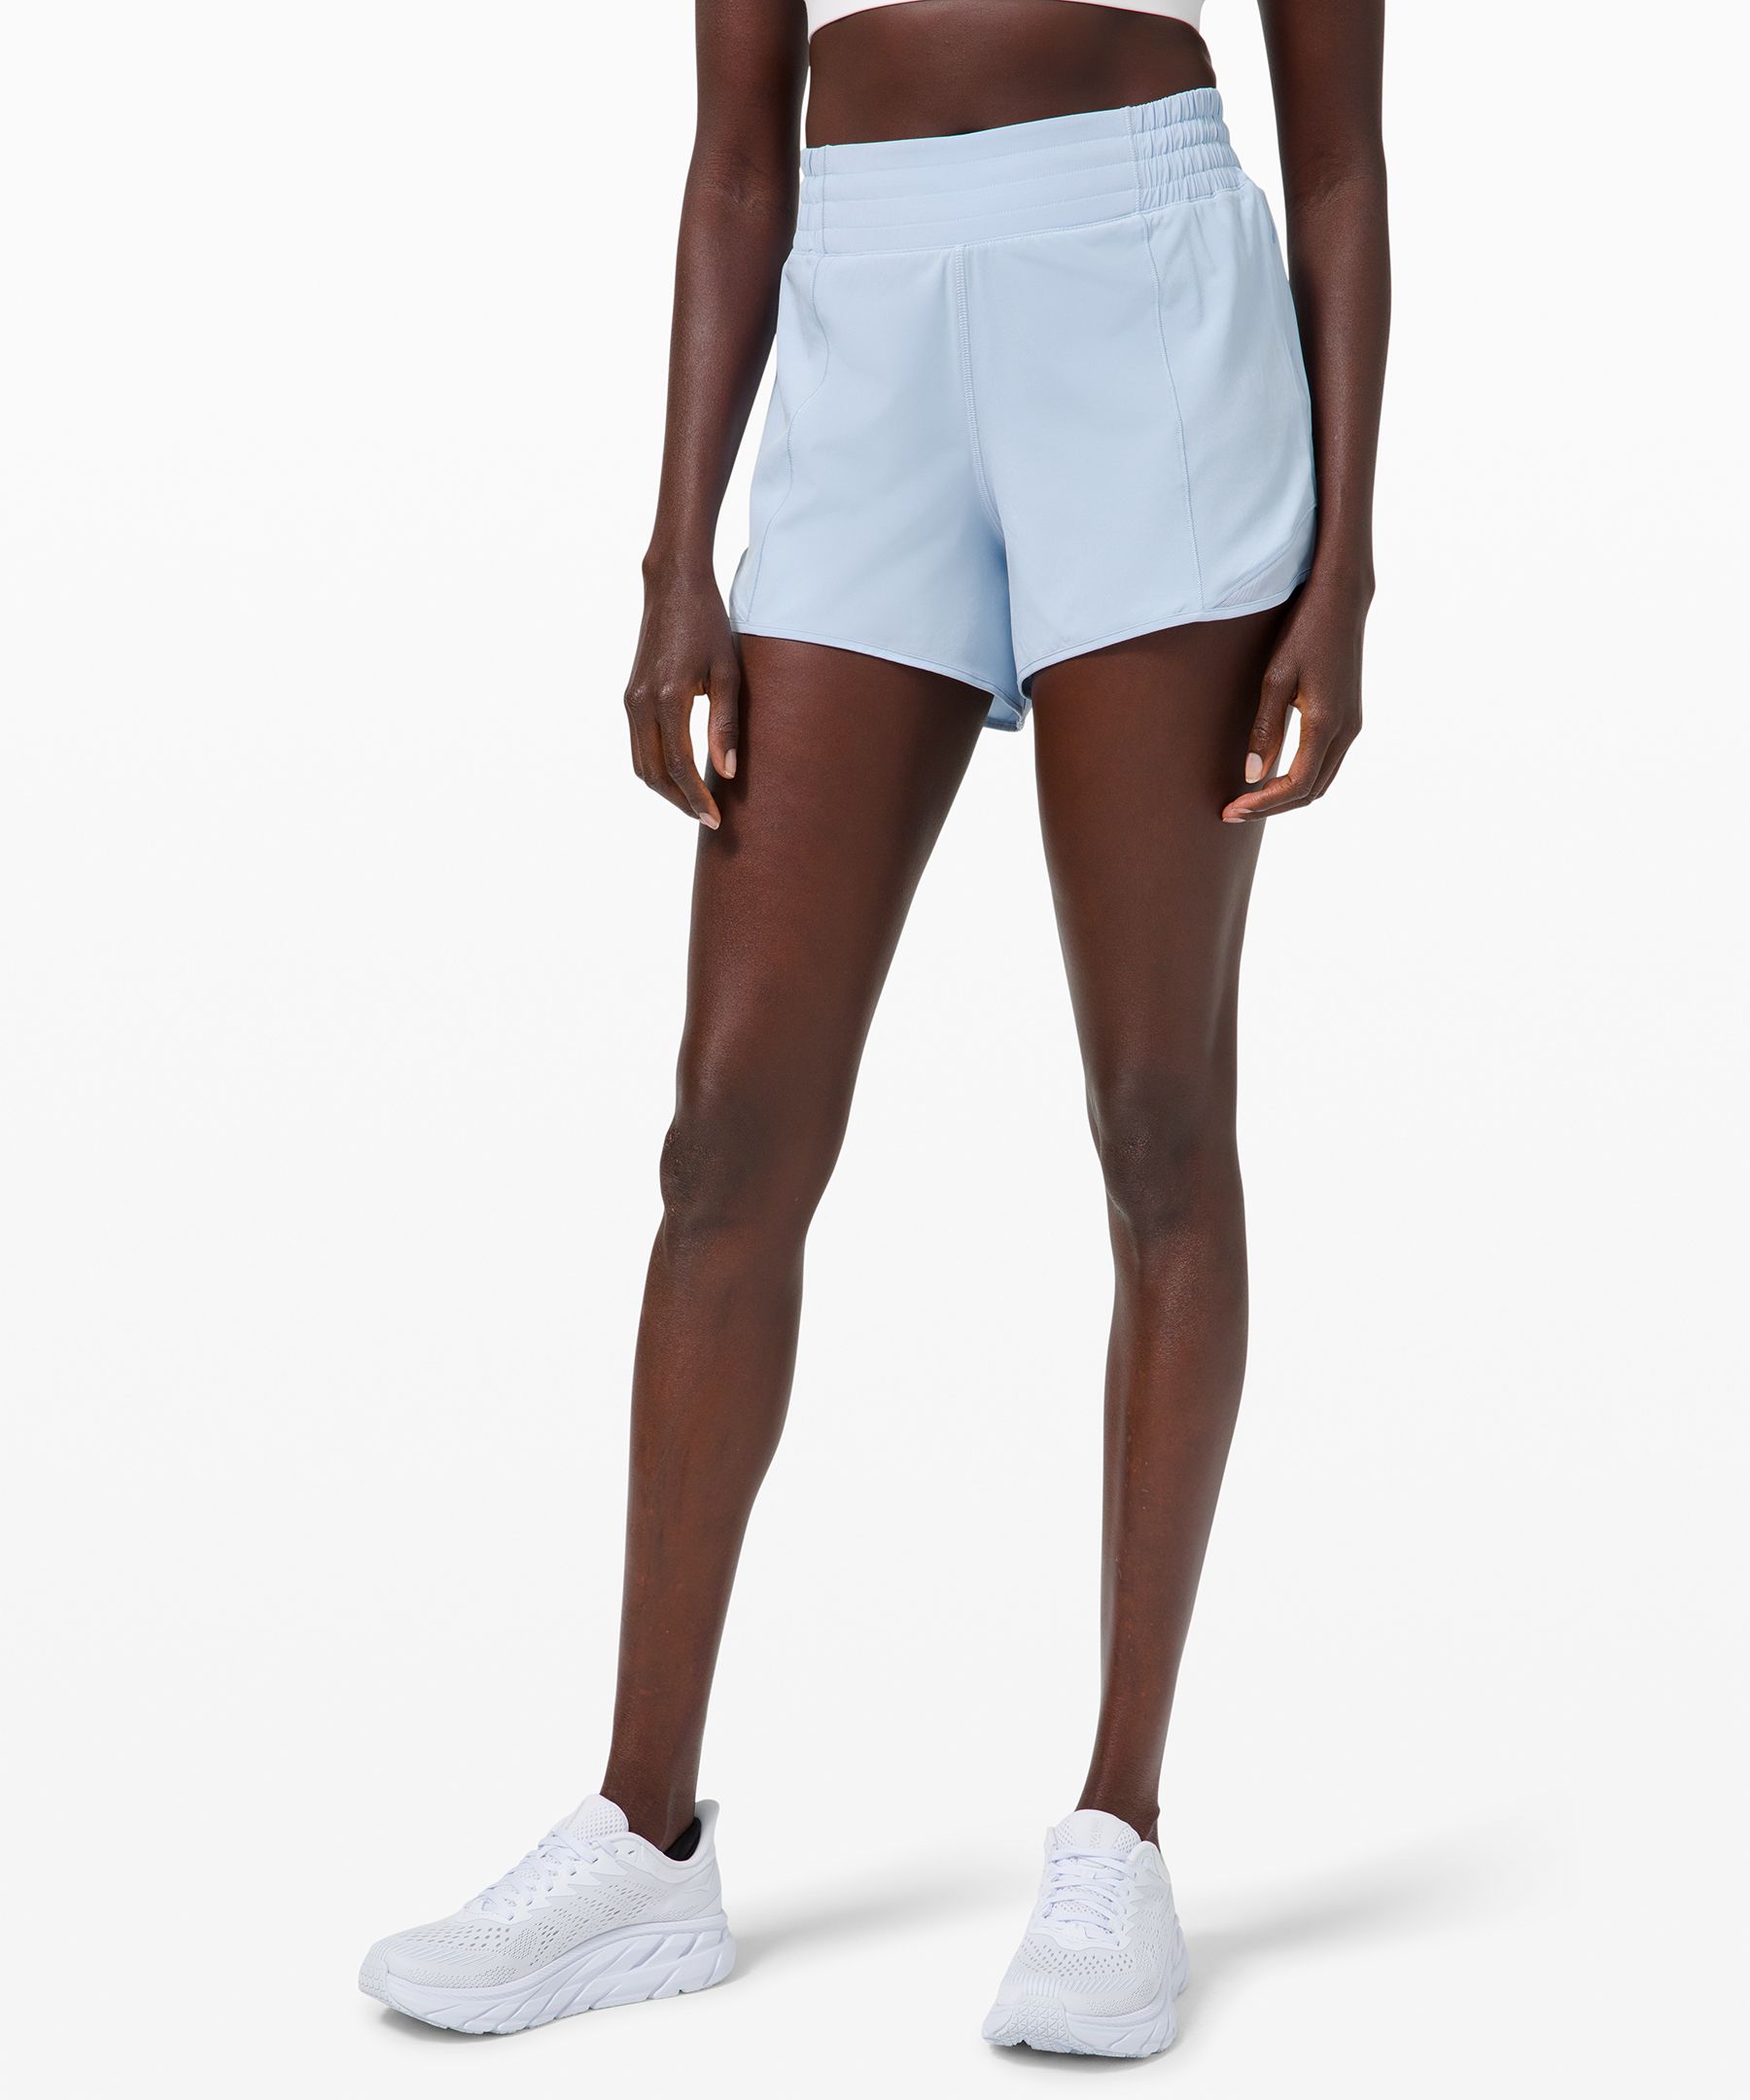 Hotty Hot High-Rise Lined Short 4, Shorts